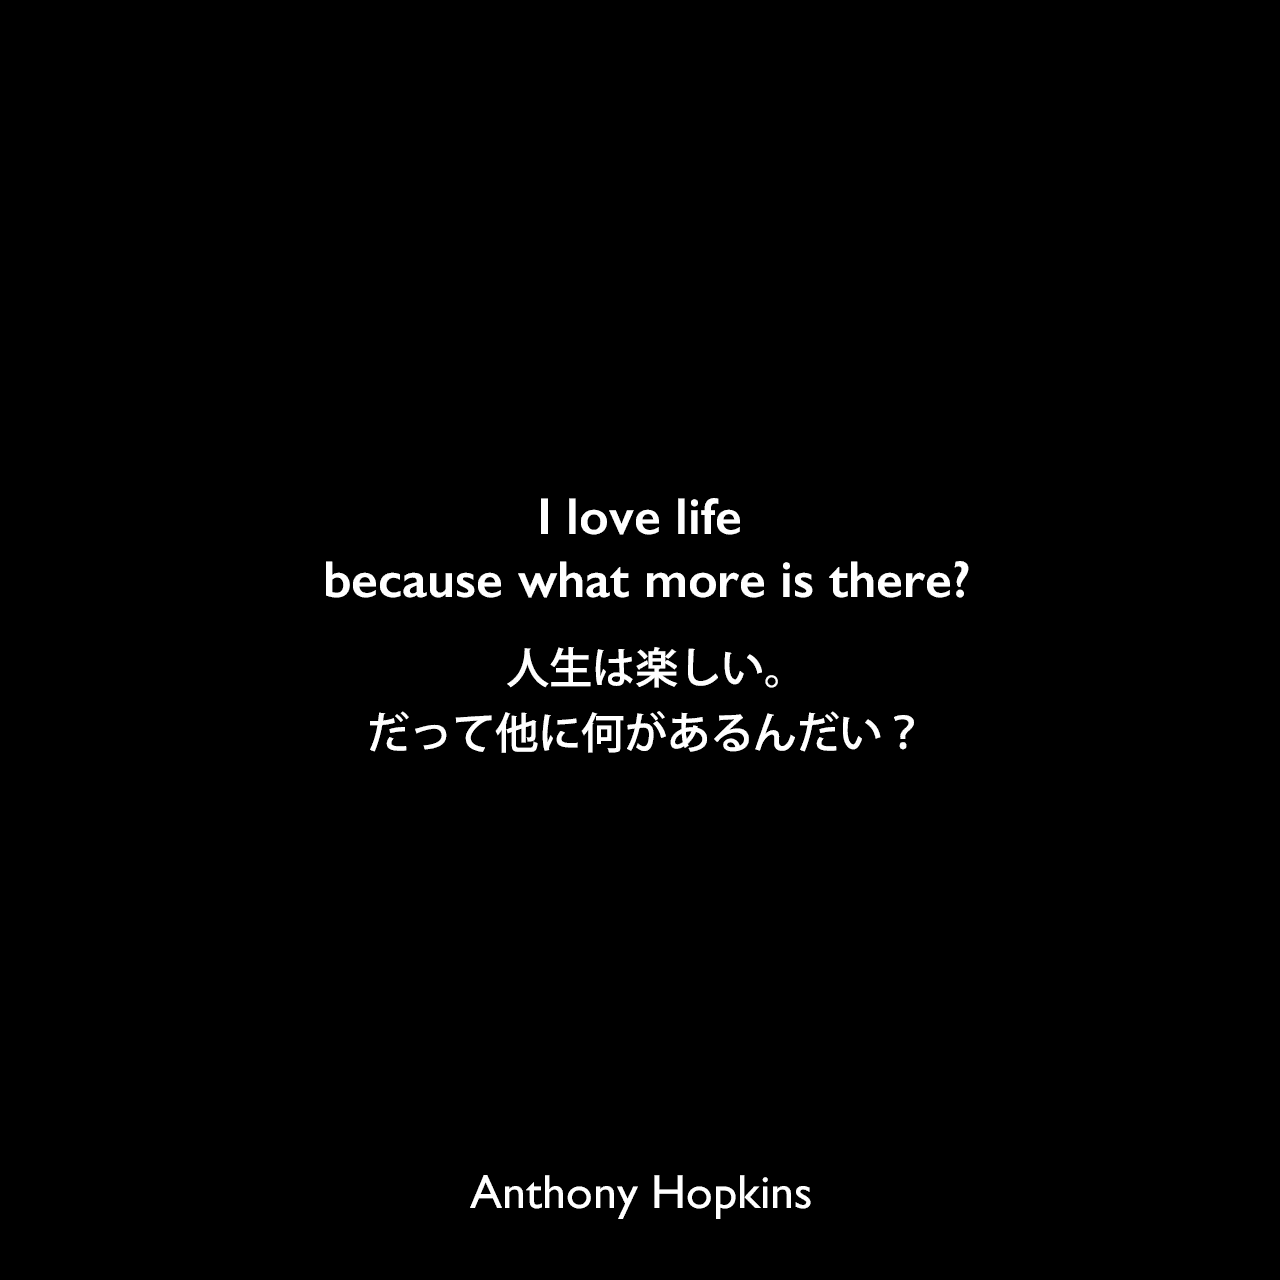 love life because what more is there?人生は楽しい。だって他に何があるんだい？